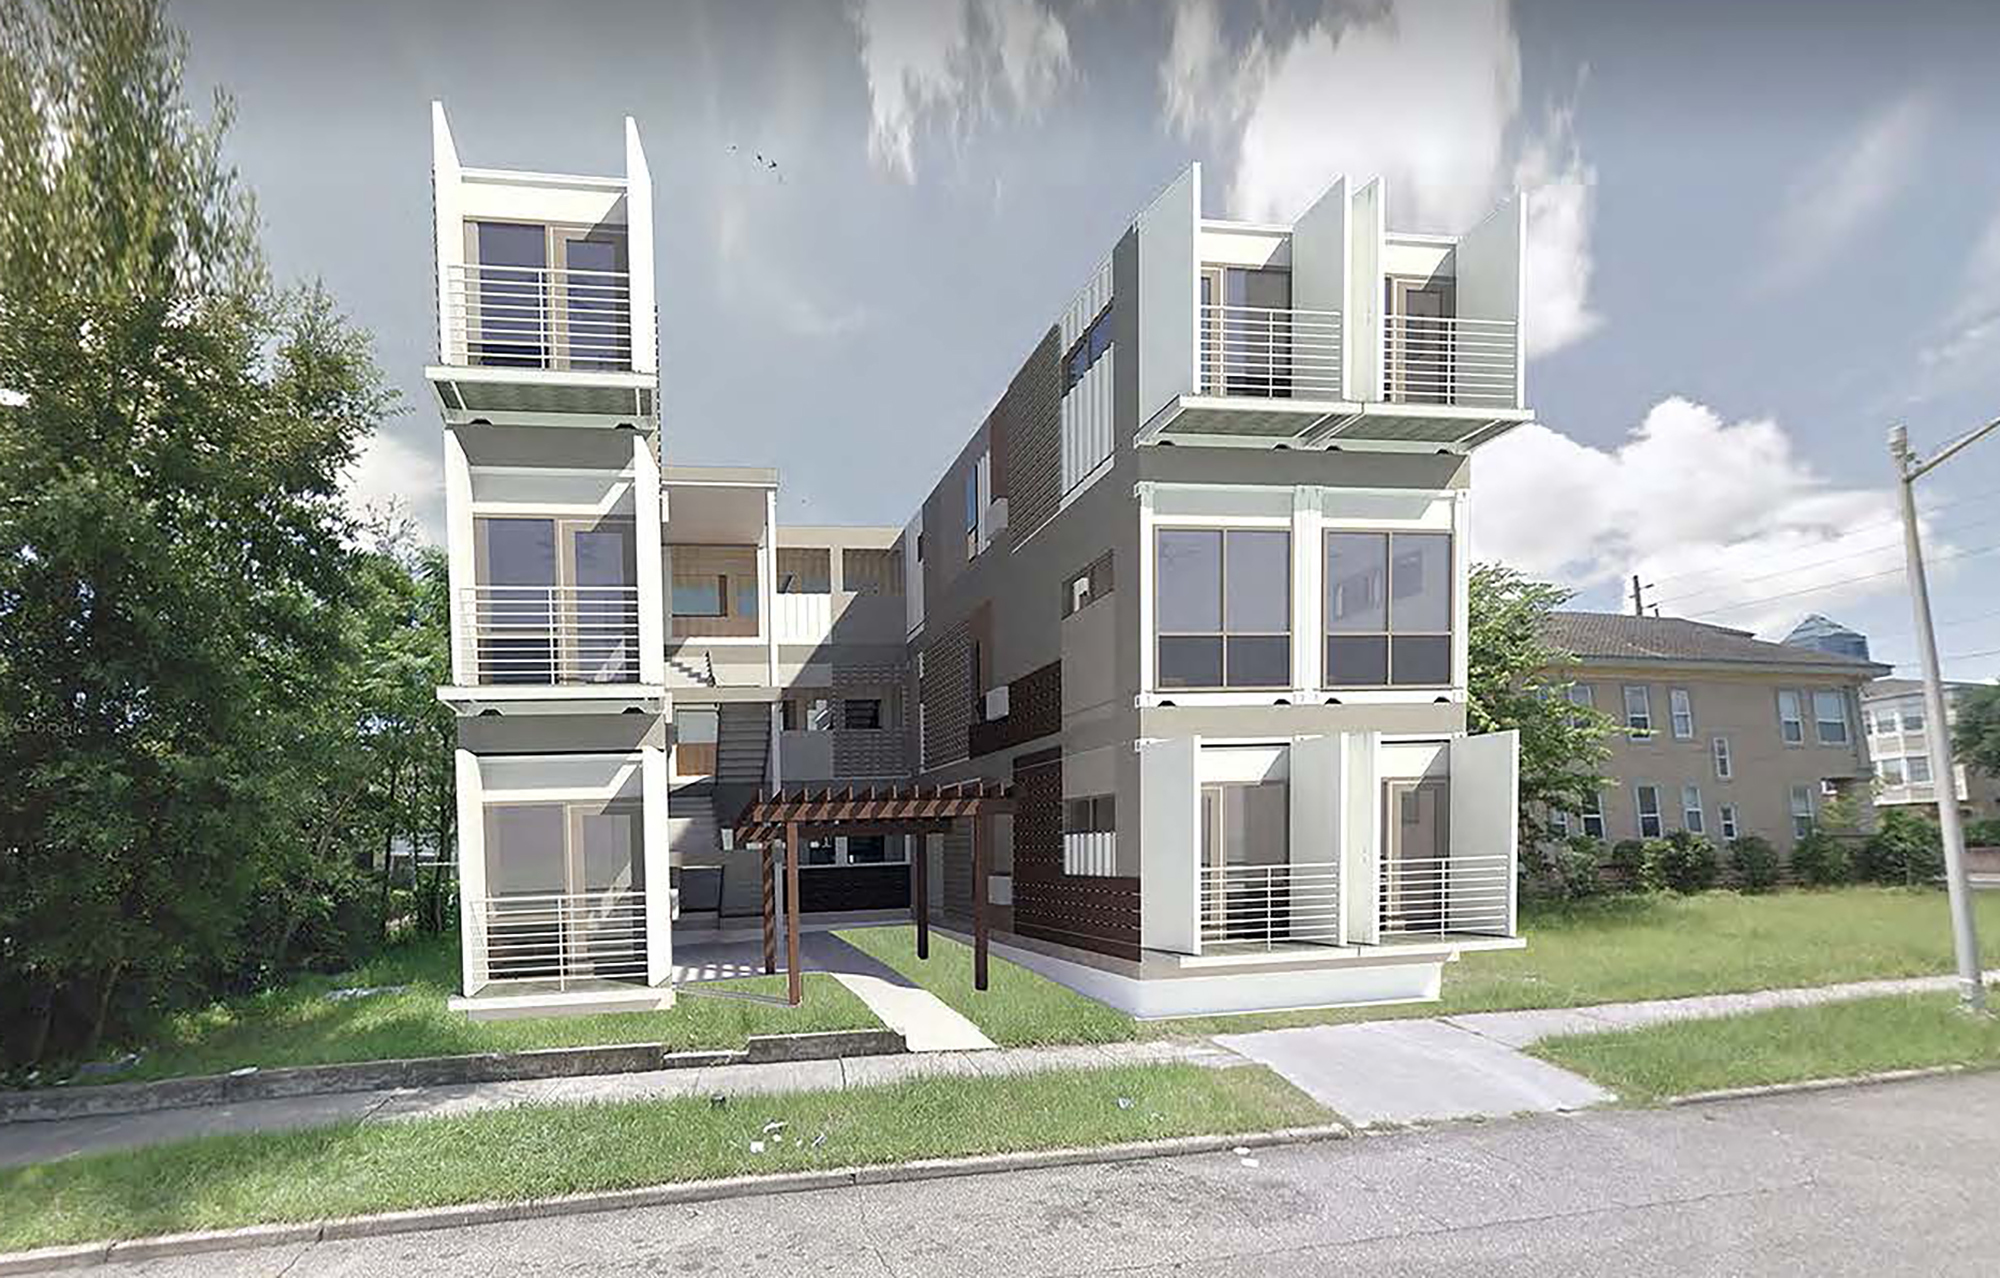 An artist’s rendering of the shipping container project planned at 412 E. Ashley St. in the Cathedral District.